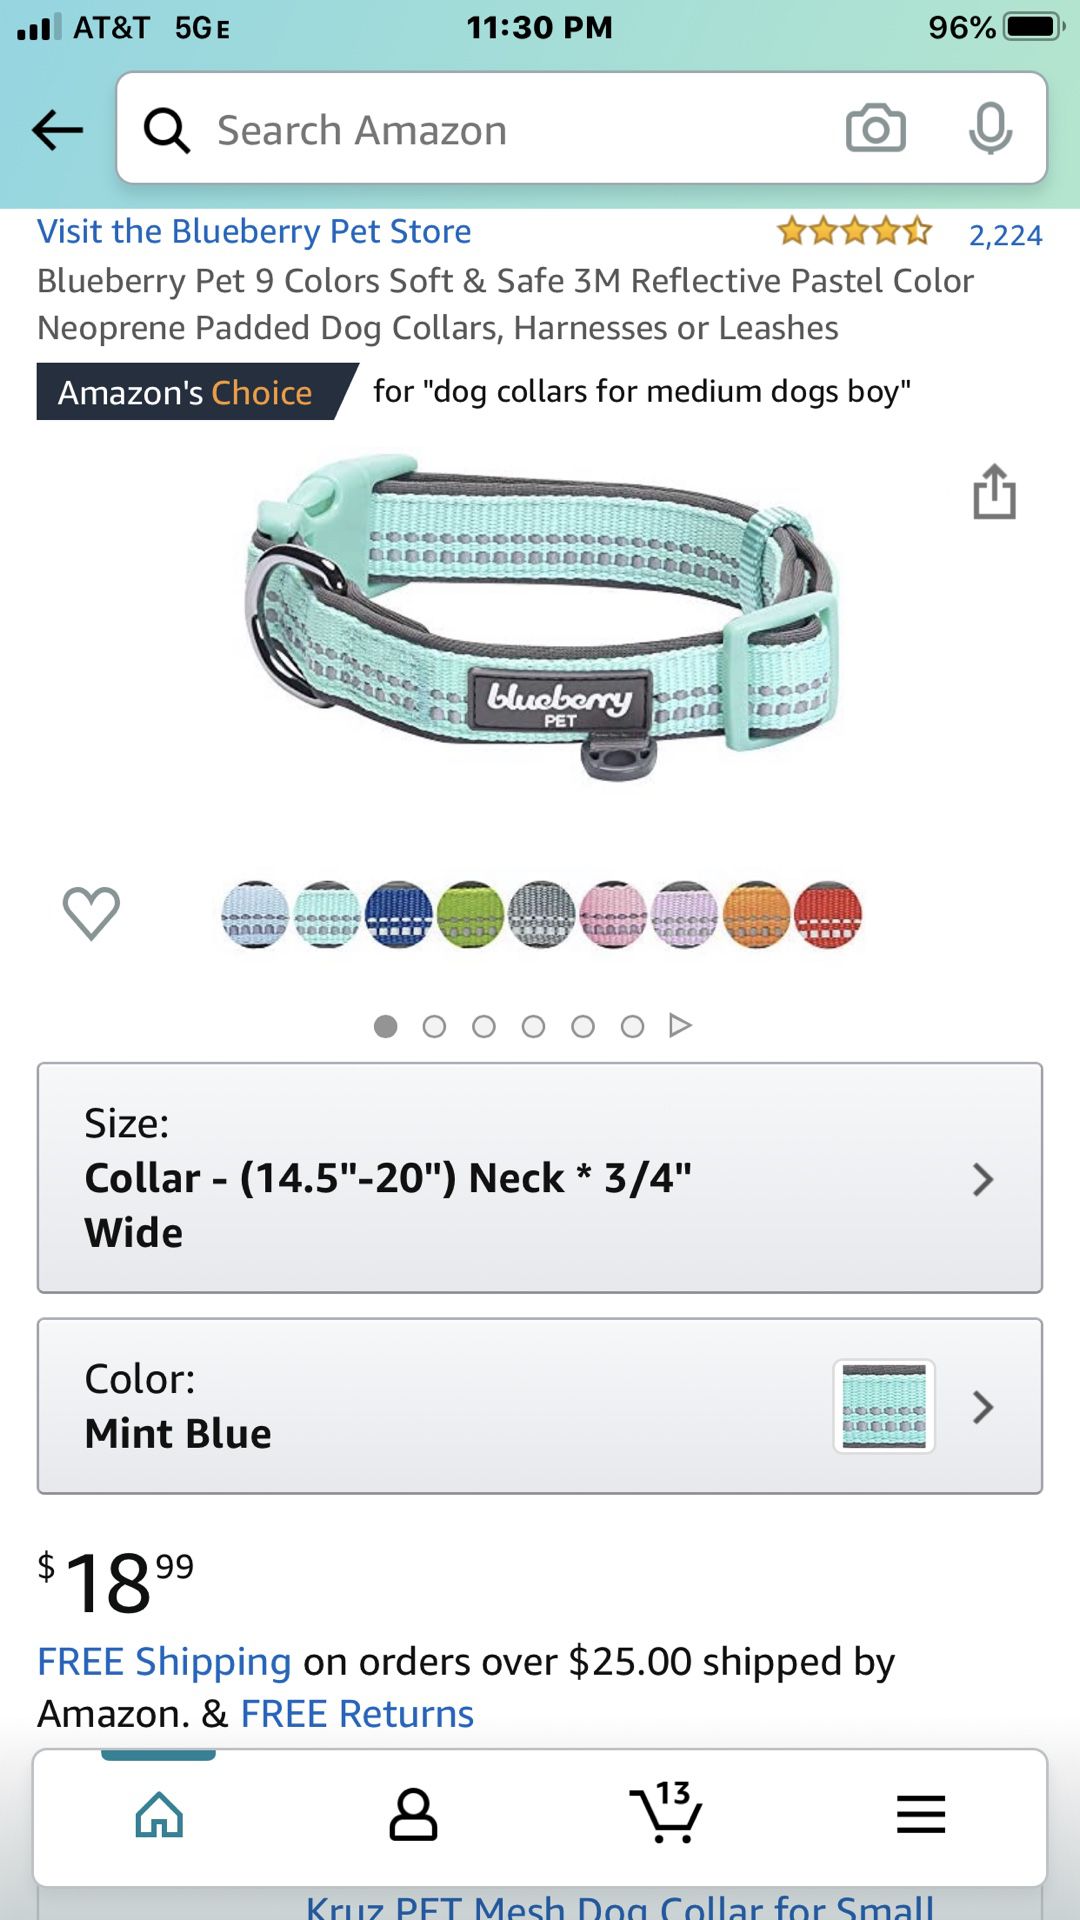 MÉDIUM Blueberry Pet 9 Colors Soft & Safe 3M Reflective Pastel Color Neoprene Padded Dog Collars, Harnesses or Leashes